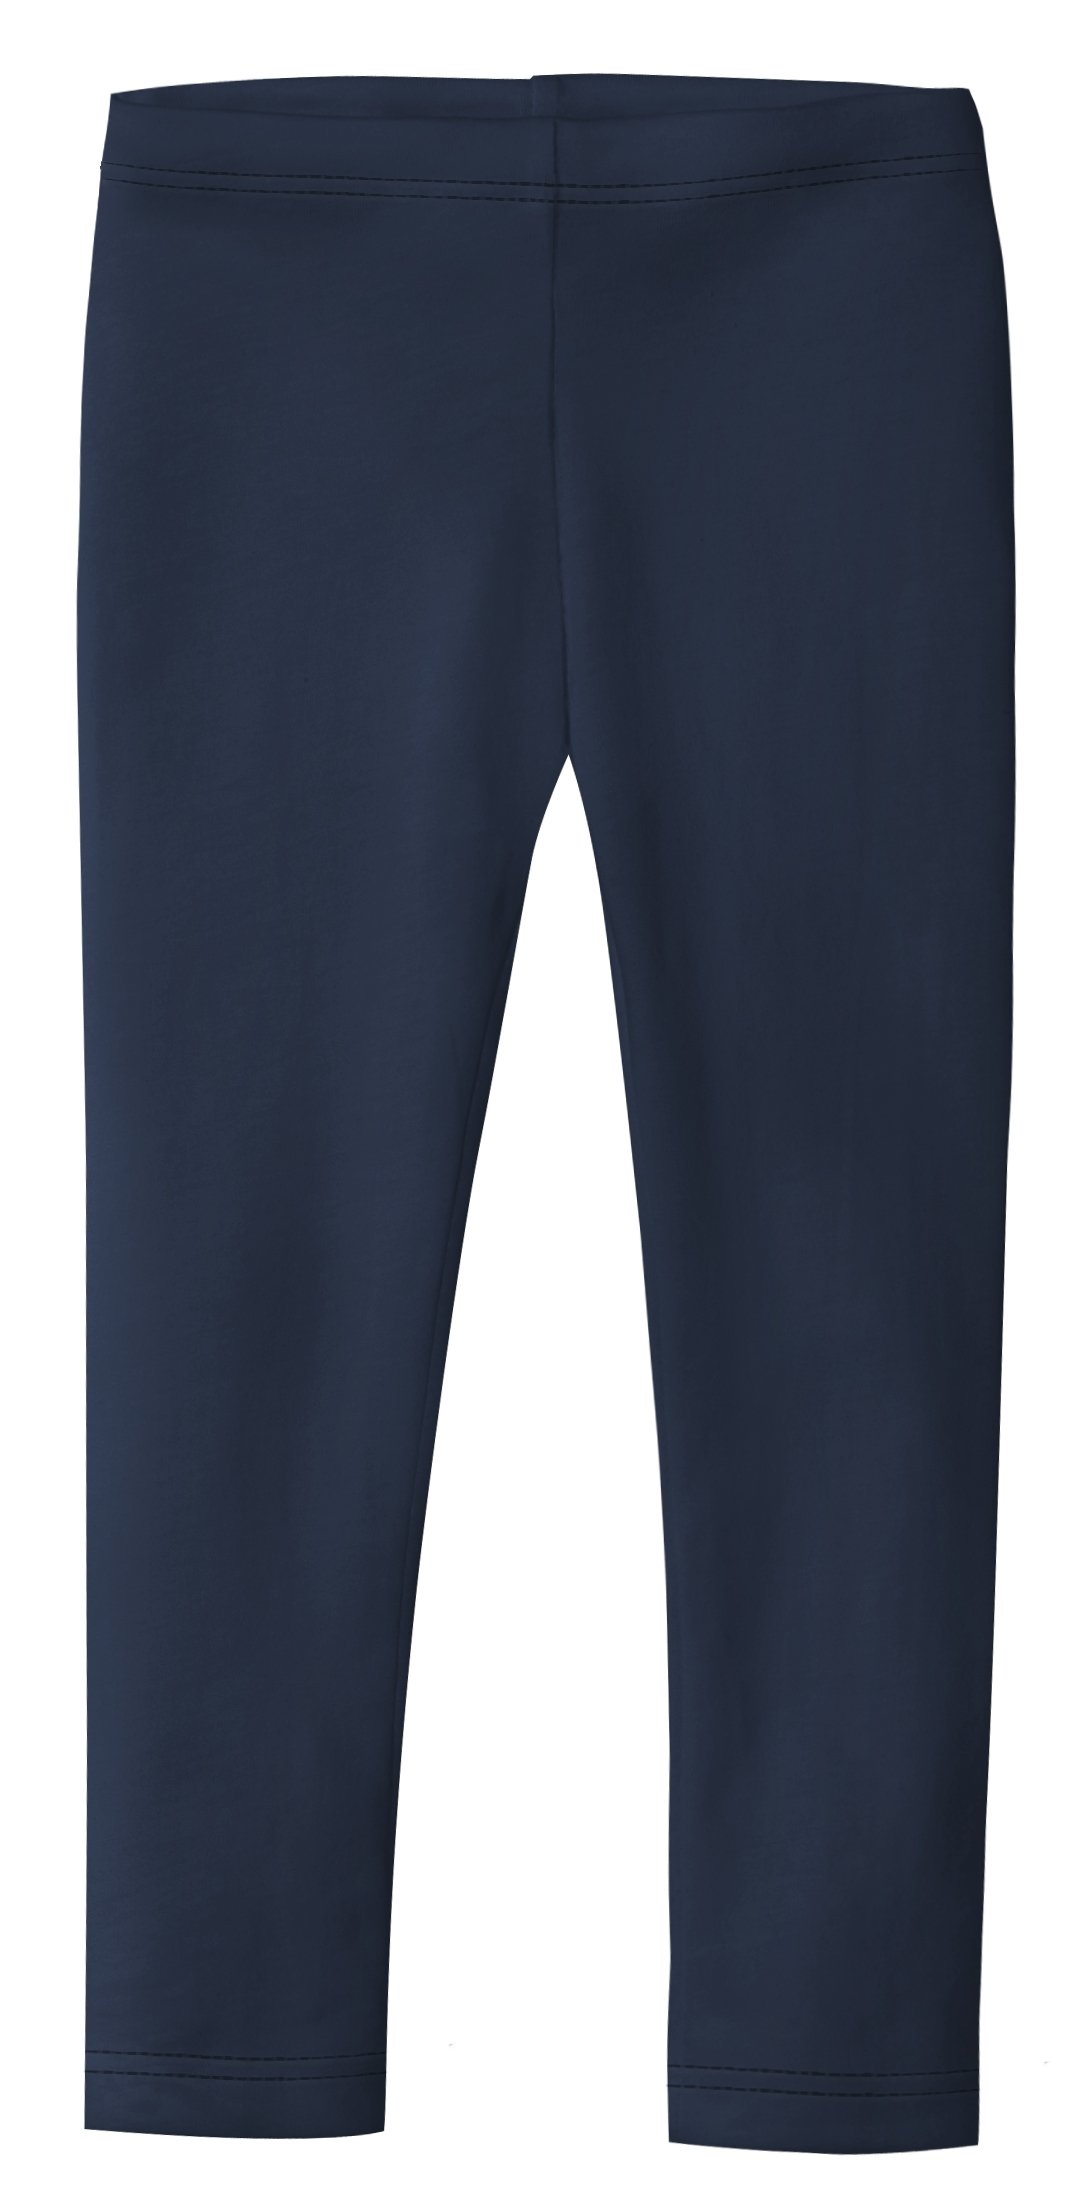 City Threads Girls' Leggings in 100% Cotton for School Uniform or Play - Made in USA!